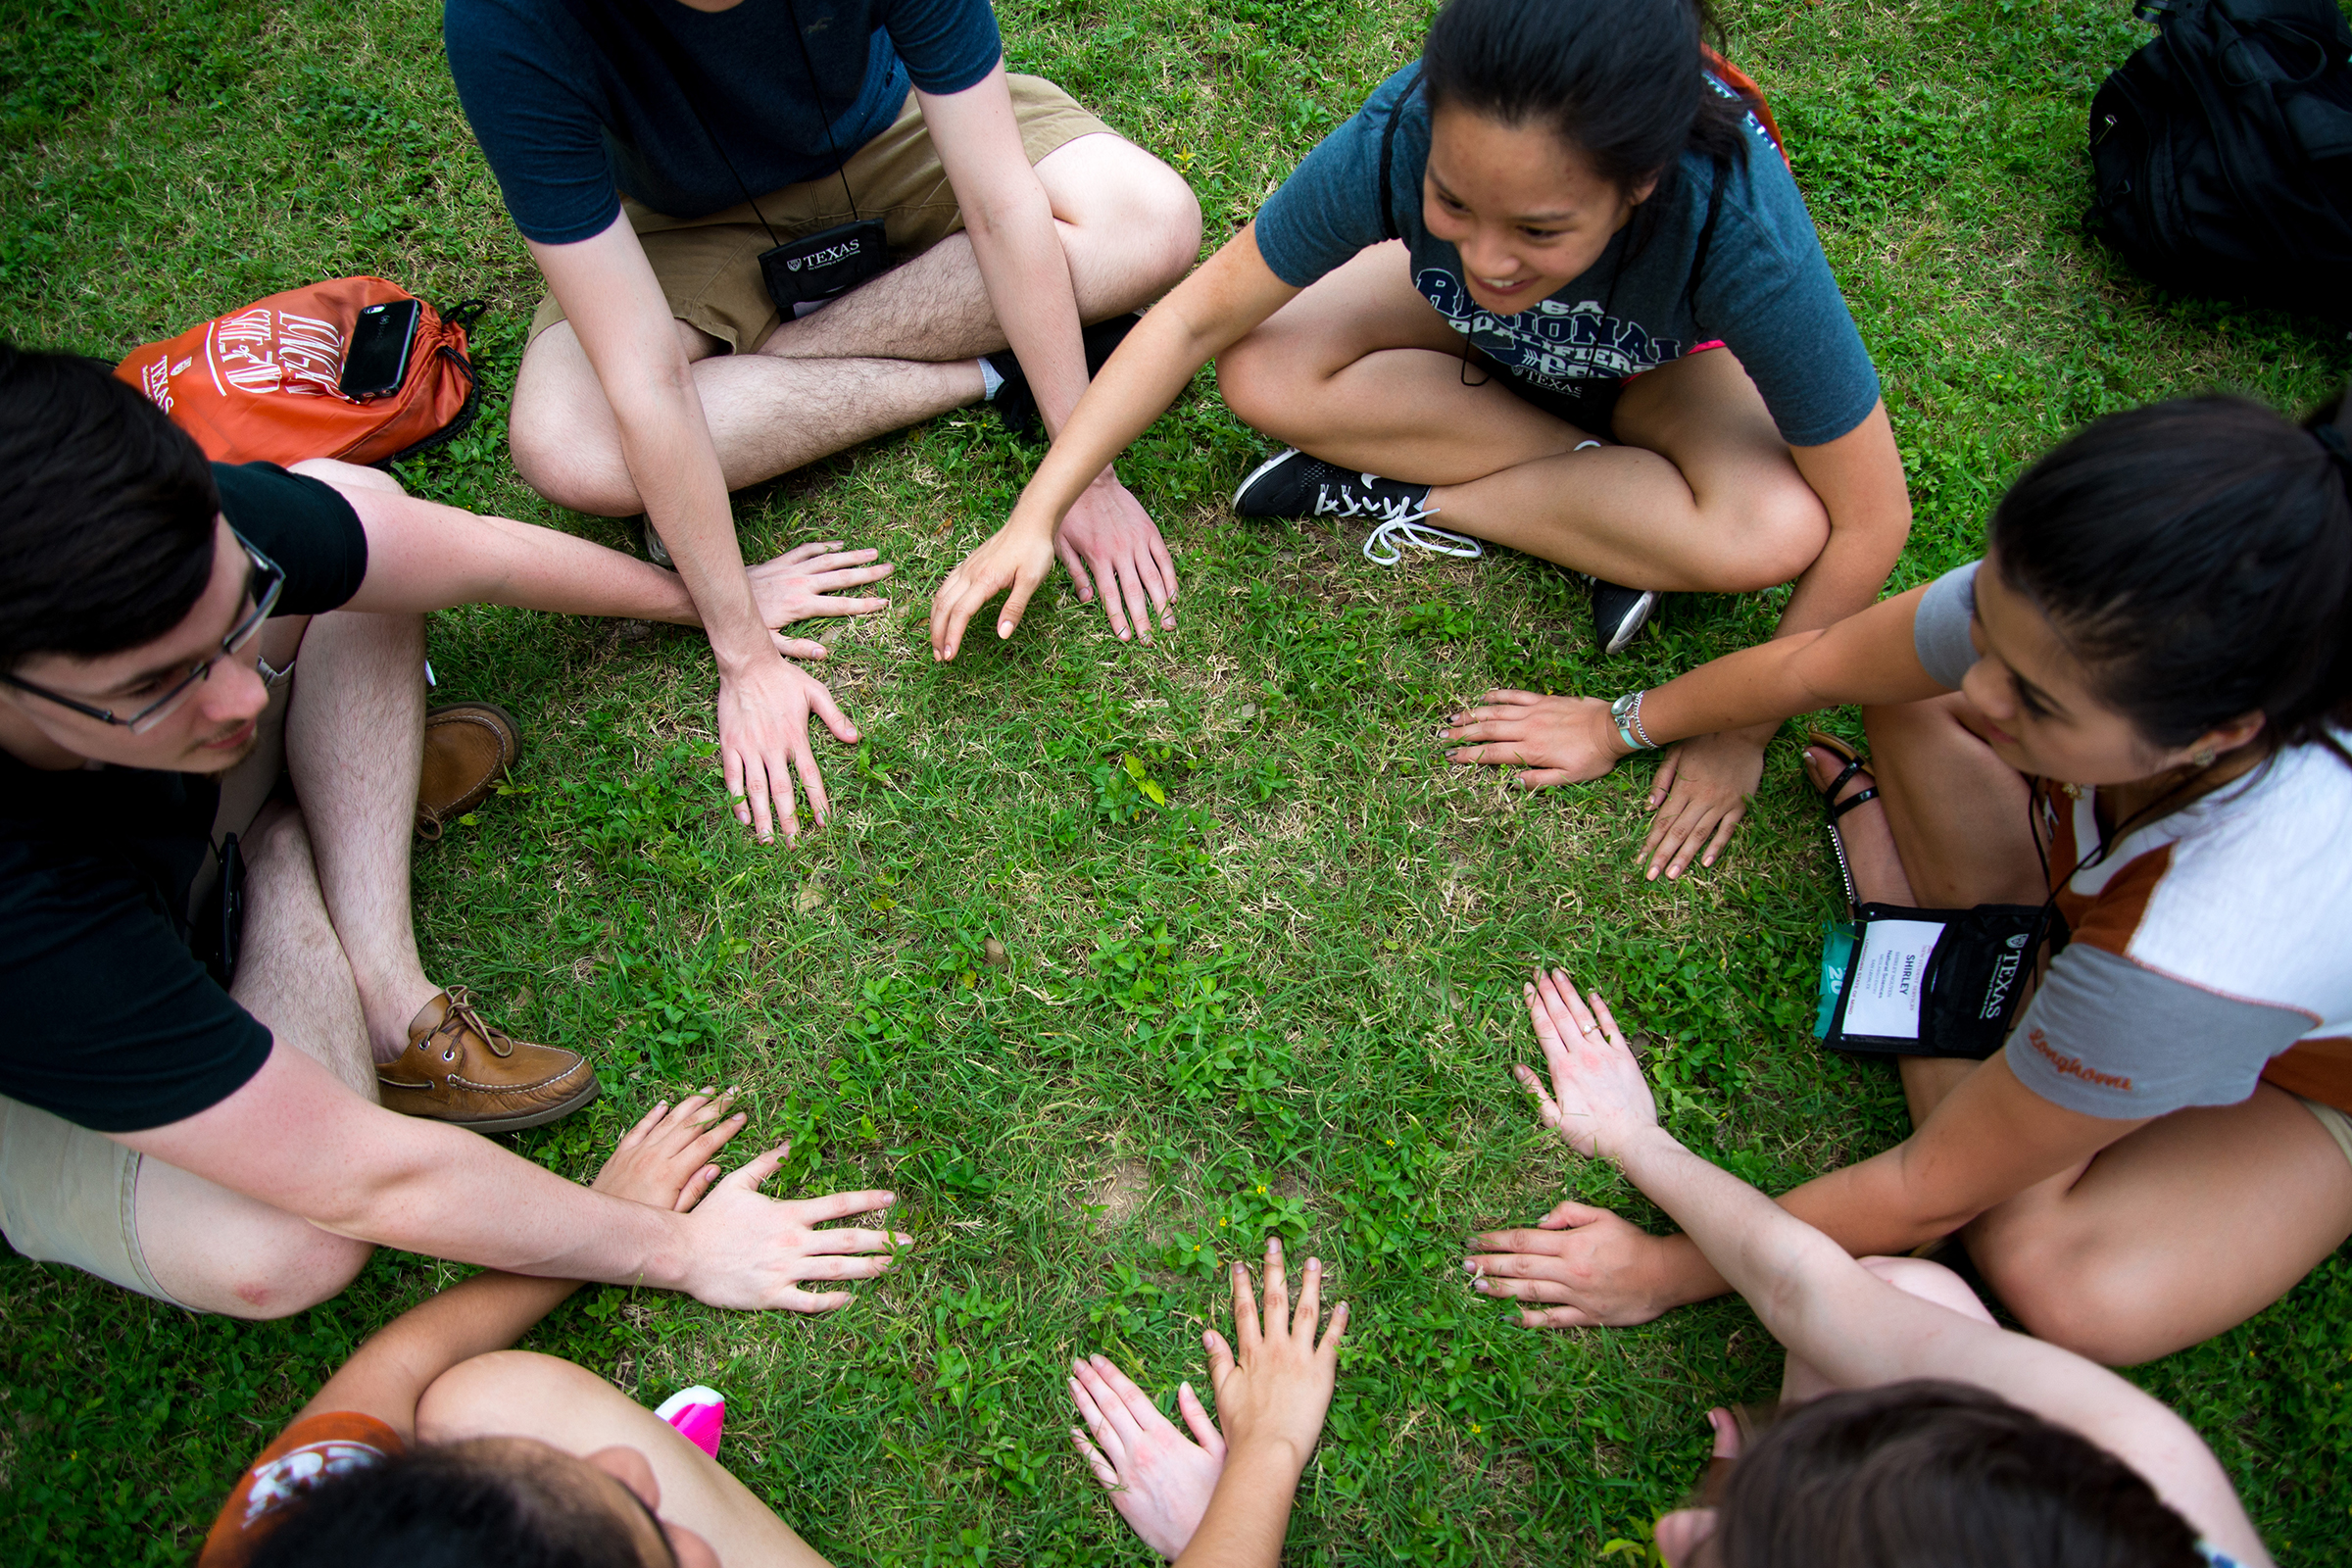 Freshman students sit in a circle on the grass near the UT turtle pond at a 2016 orientation.